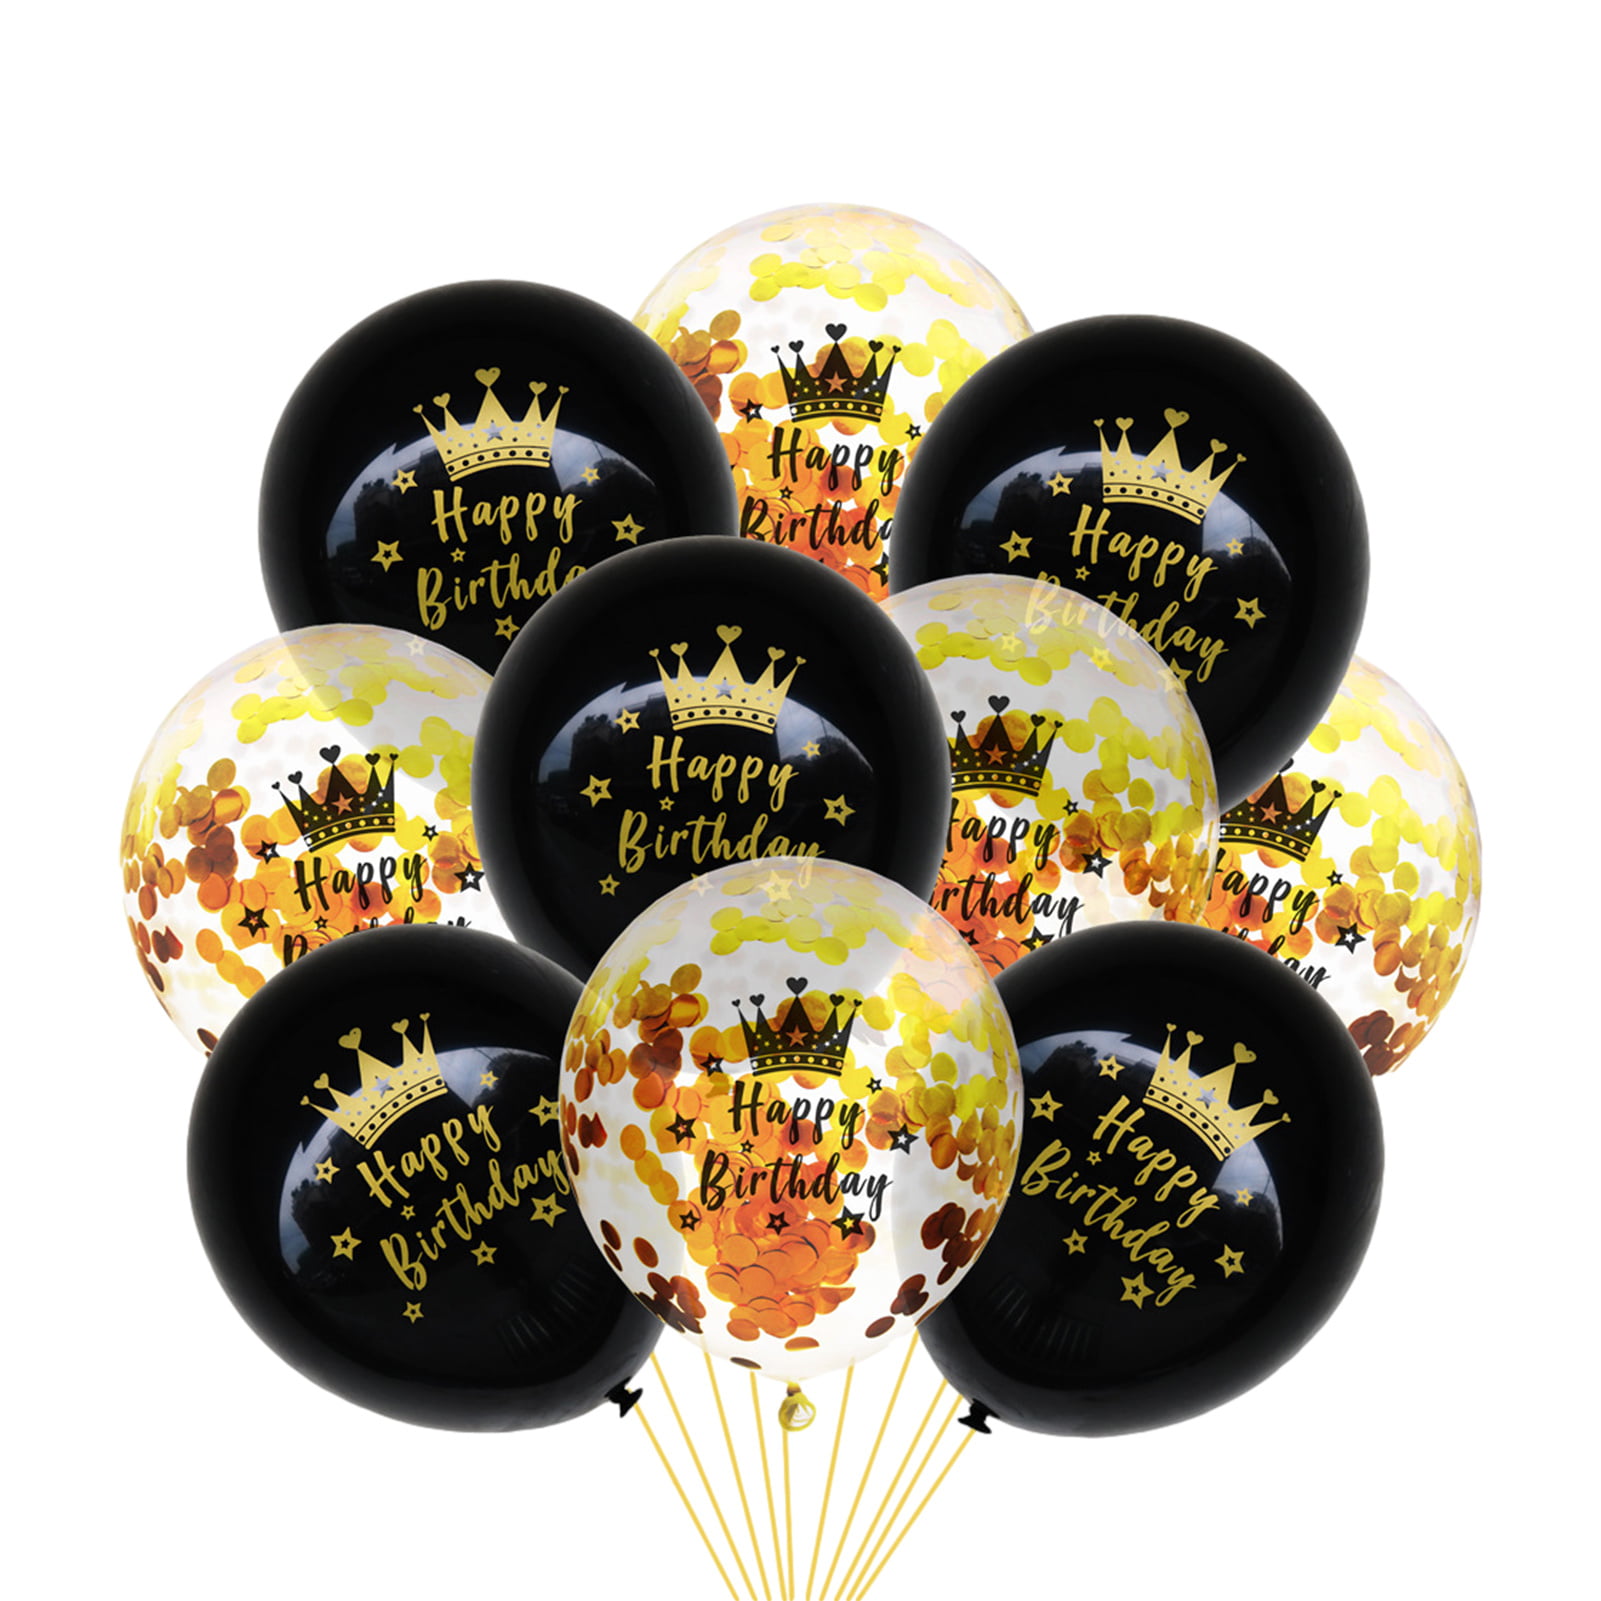 Details about   17PC Set Wedding Birthday Balloons Latex Ballons Kids Boy Girl Baby Party Decor